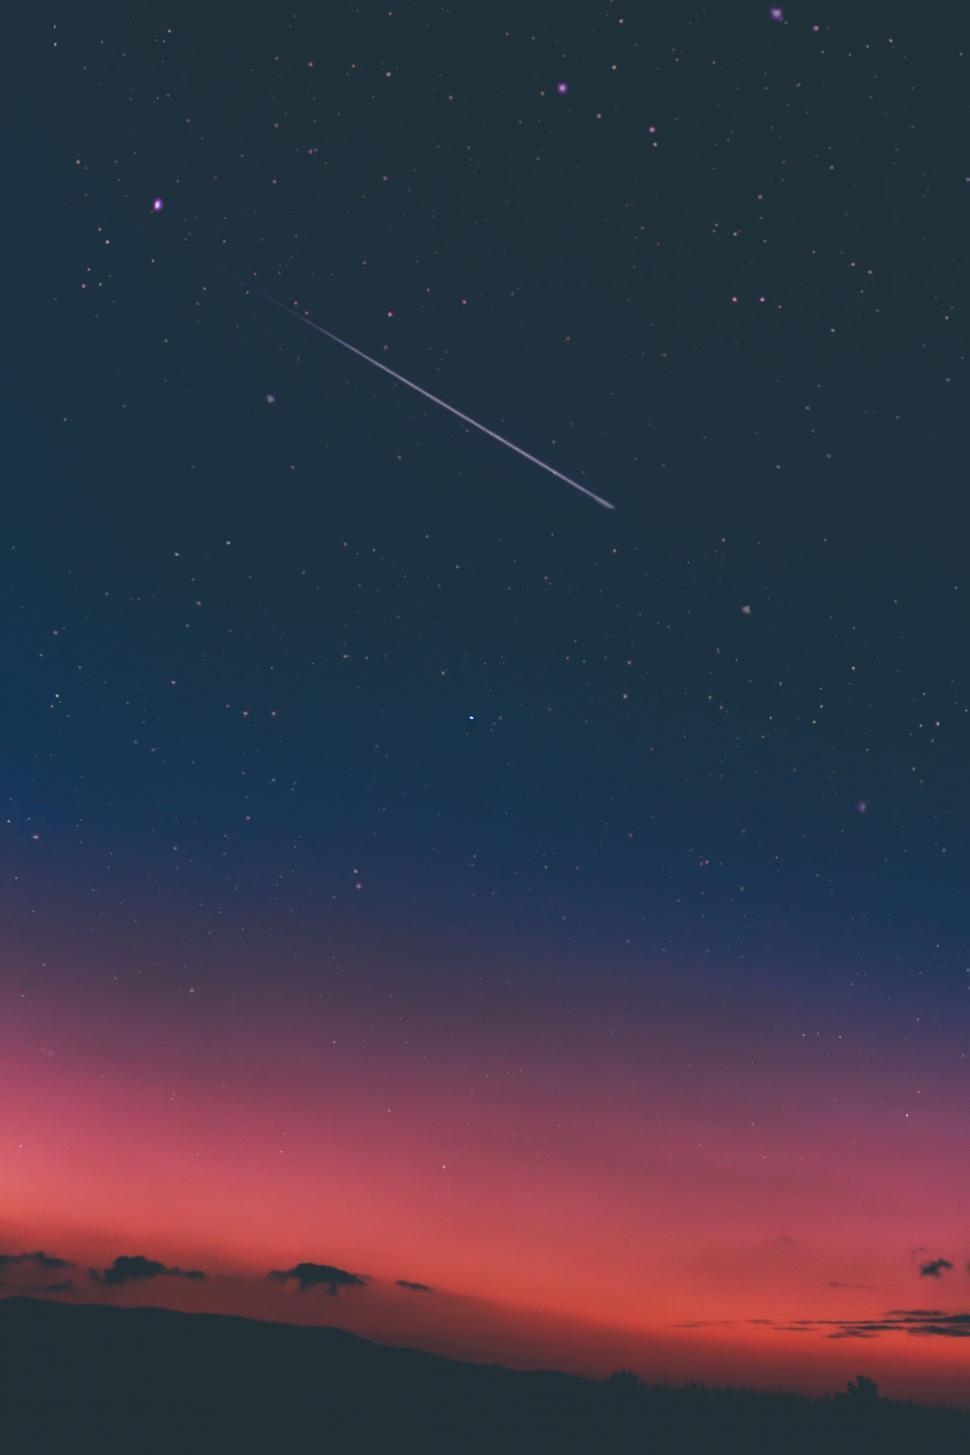 Free Image of Night Sky With Plane Flying in the Distance 